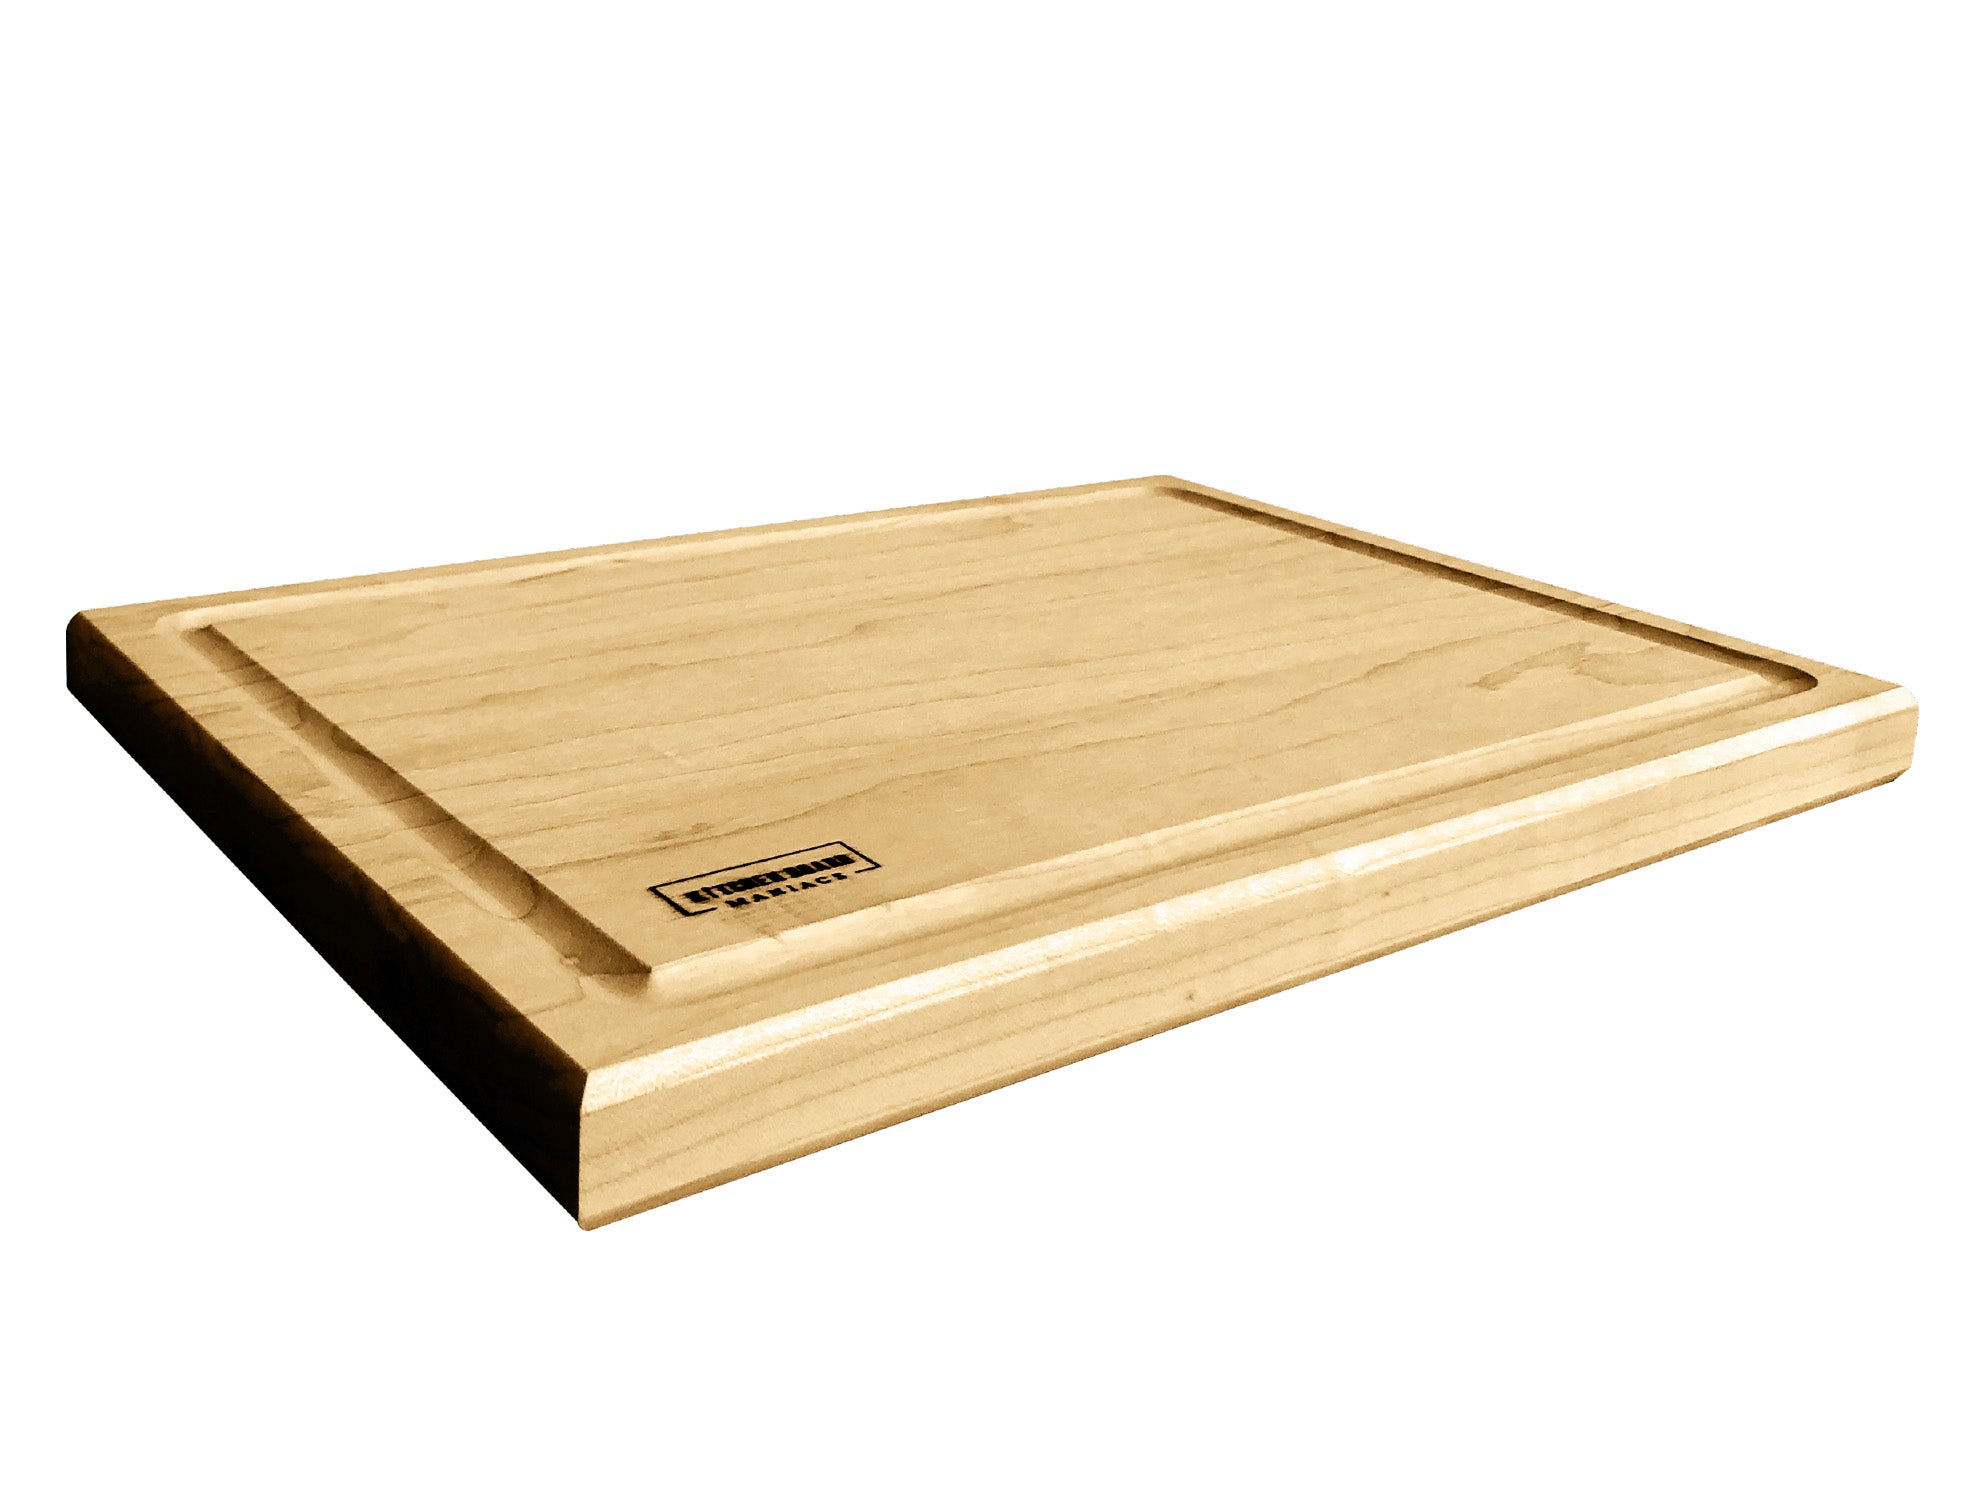 LARGE Maple Wood Cutting Boards for Kitchen 14x10 - Great Butter Board